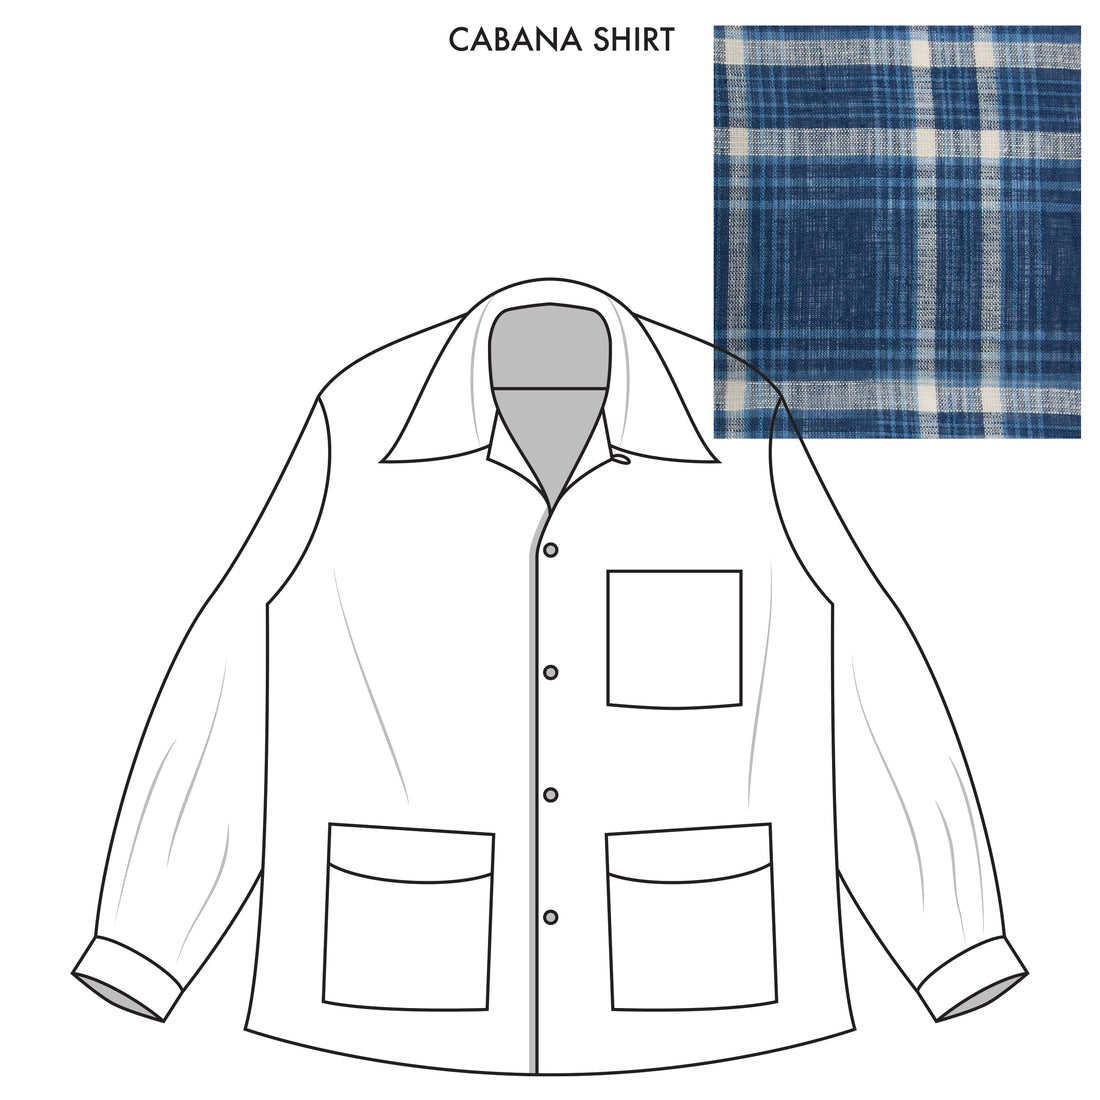 Bryceland's Cabana Shirt Made-to-Order Steel